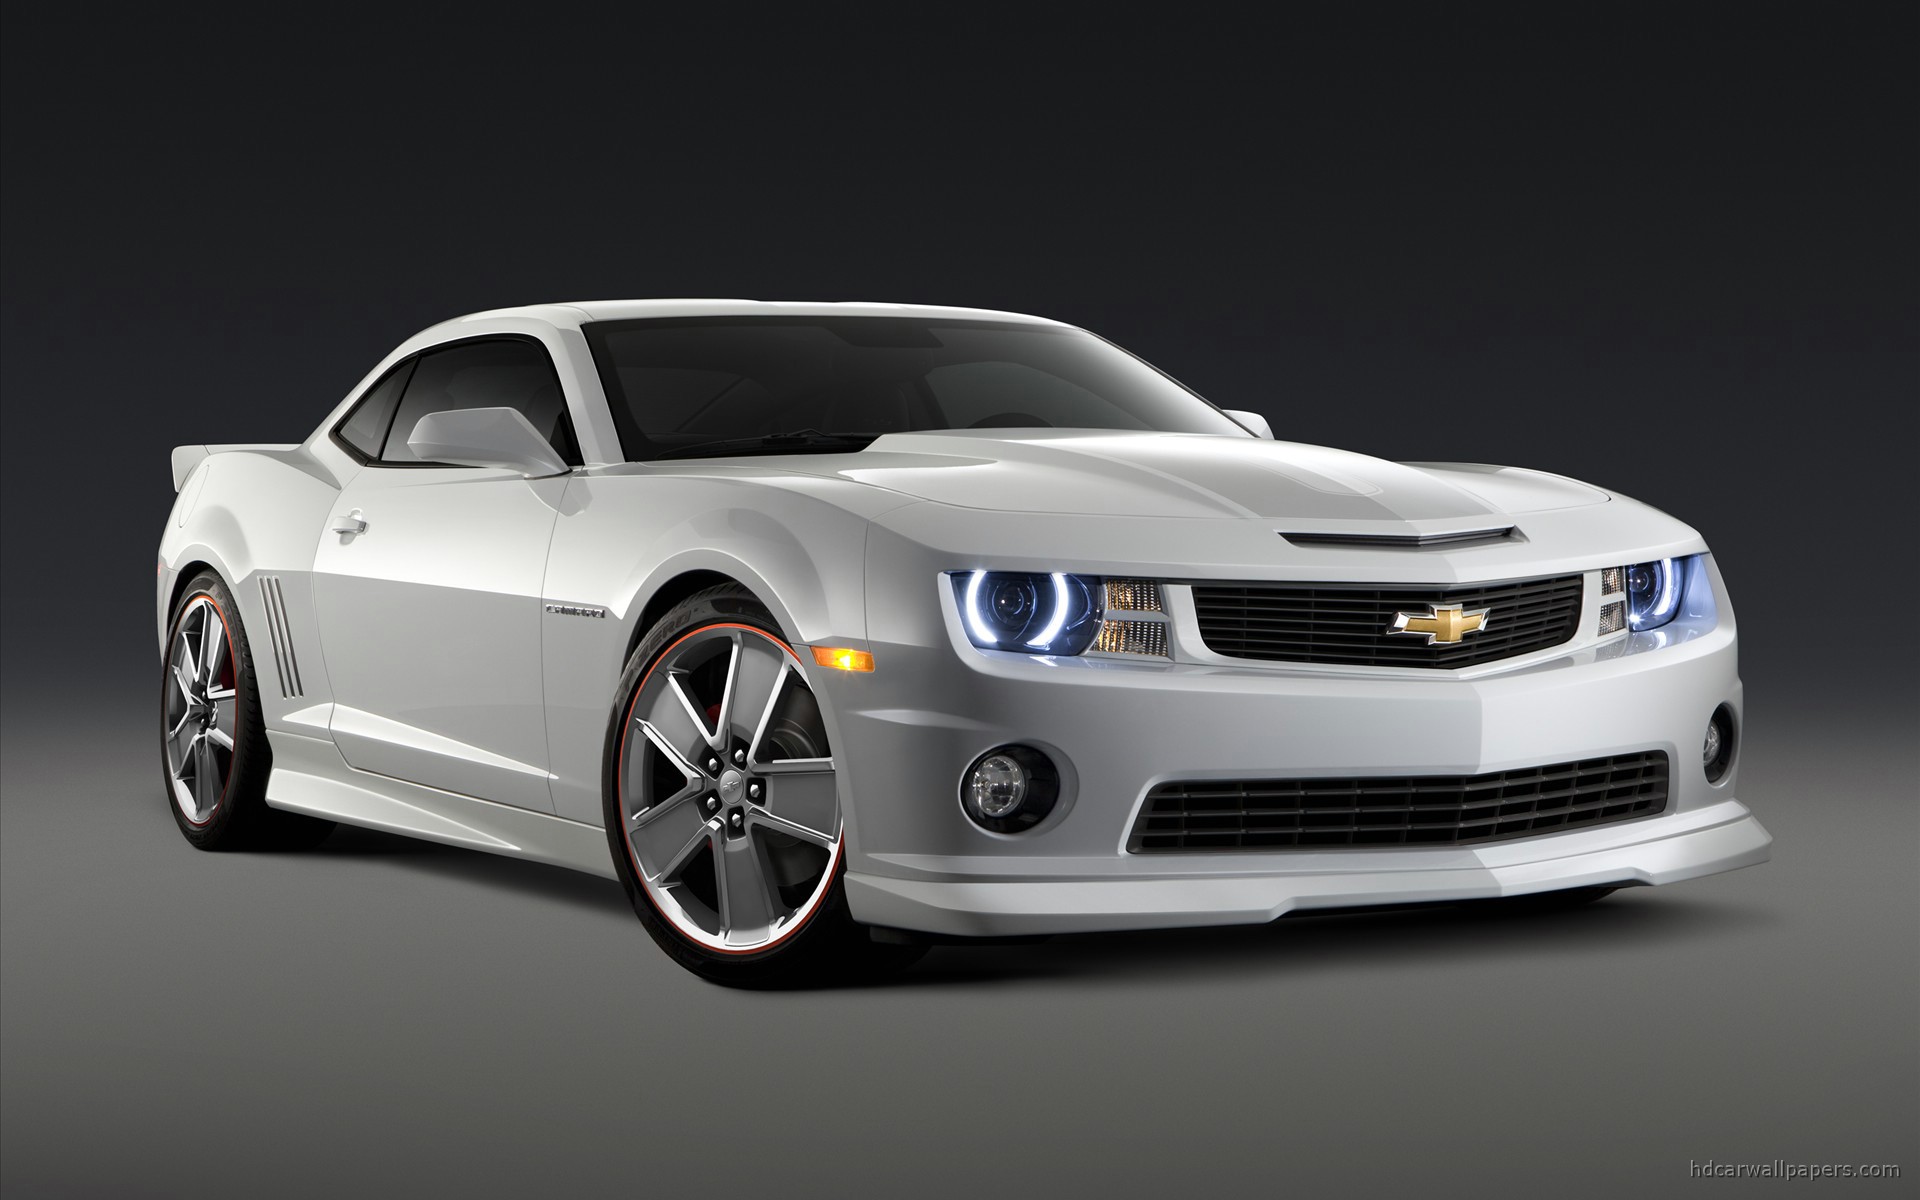 Chevrolet Camaro Chroma Wallpapers HD Wallpapers 1920x1200